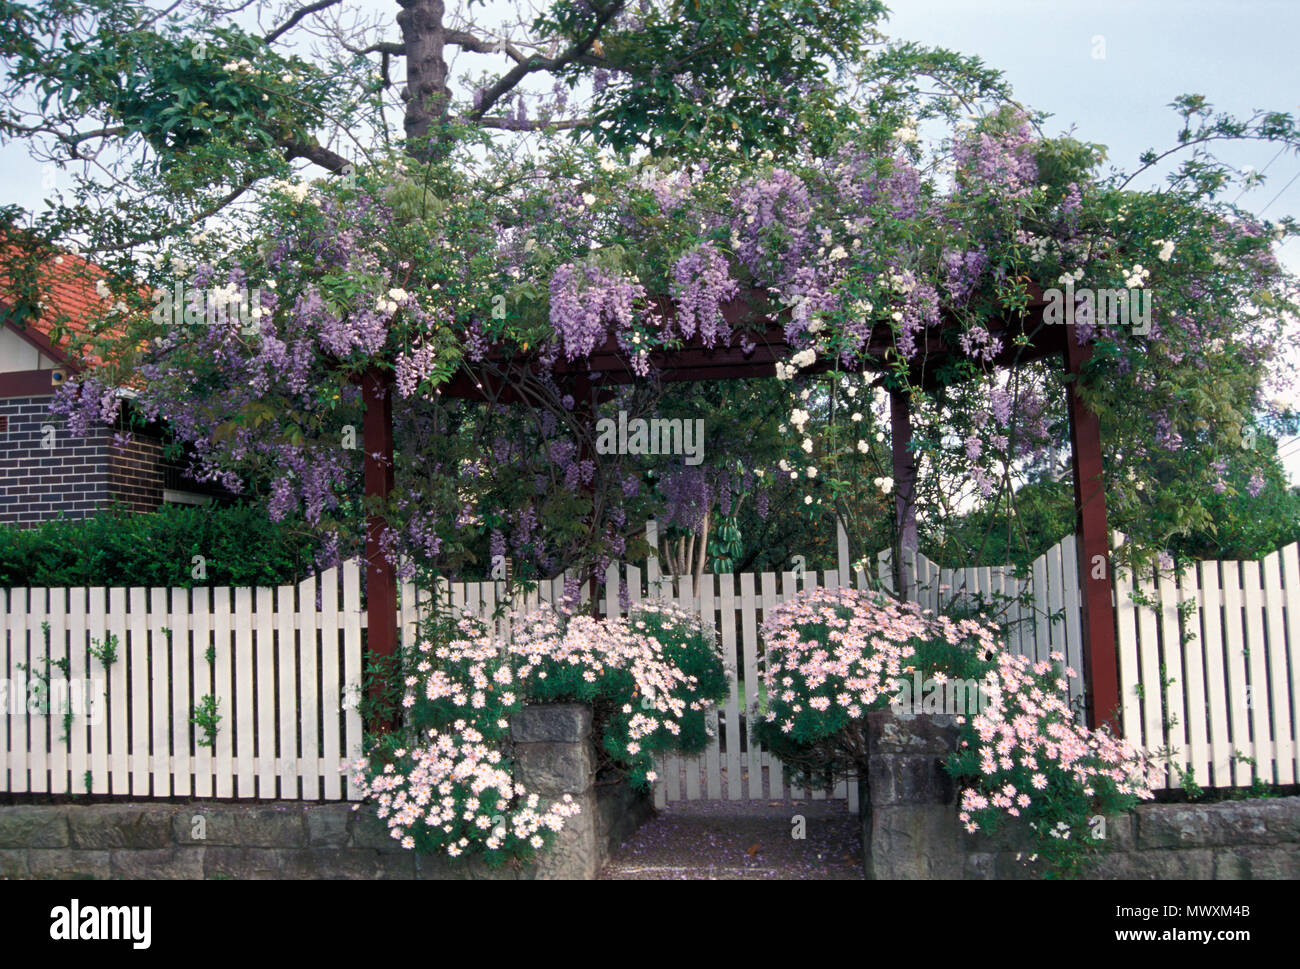 BEAUTIFUL WISTERIA GROWING OVER WOODEN GARDEN ENTRANCE WITH PINK DAISIES GROWING IN THE FOREGROUND. SYDNEY, AUSTRALIA. Stock Photo